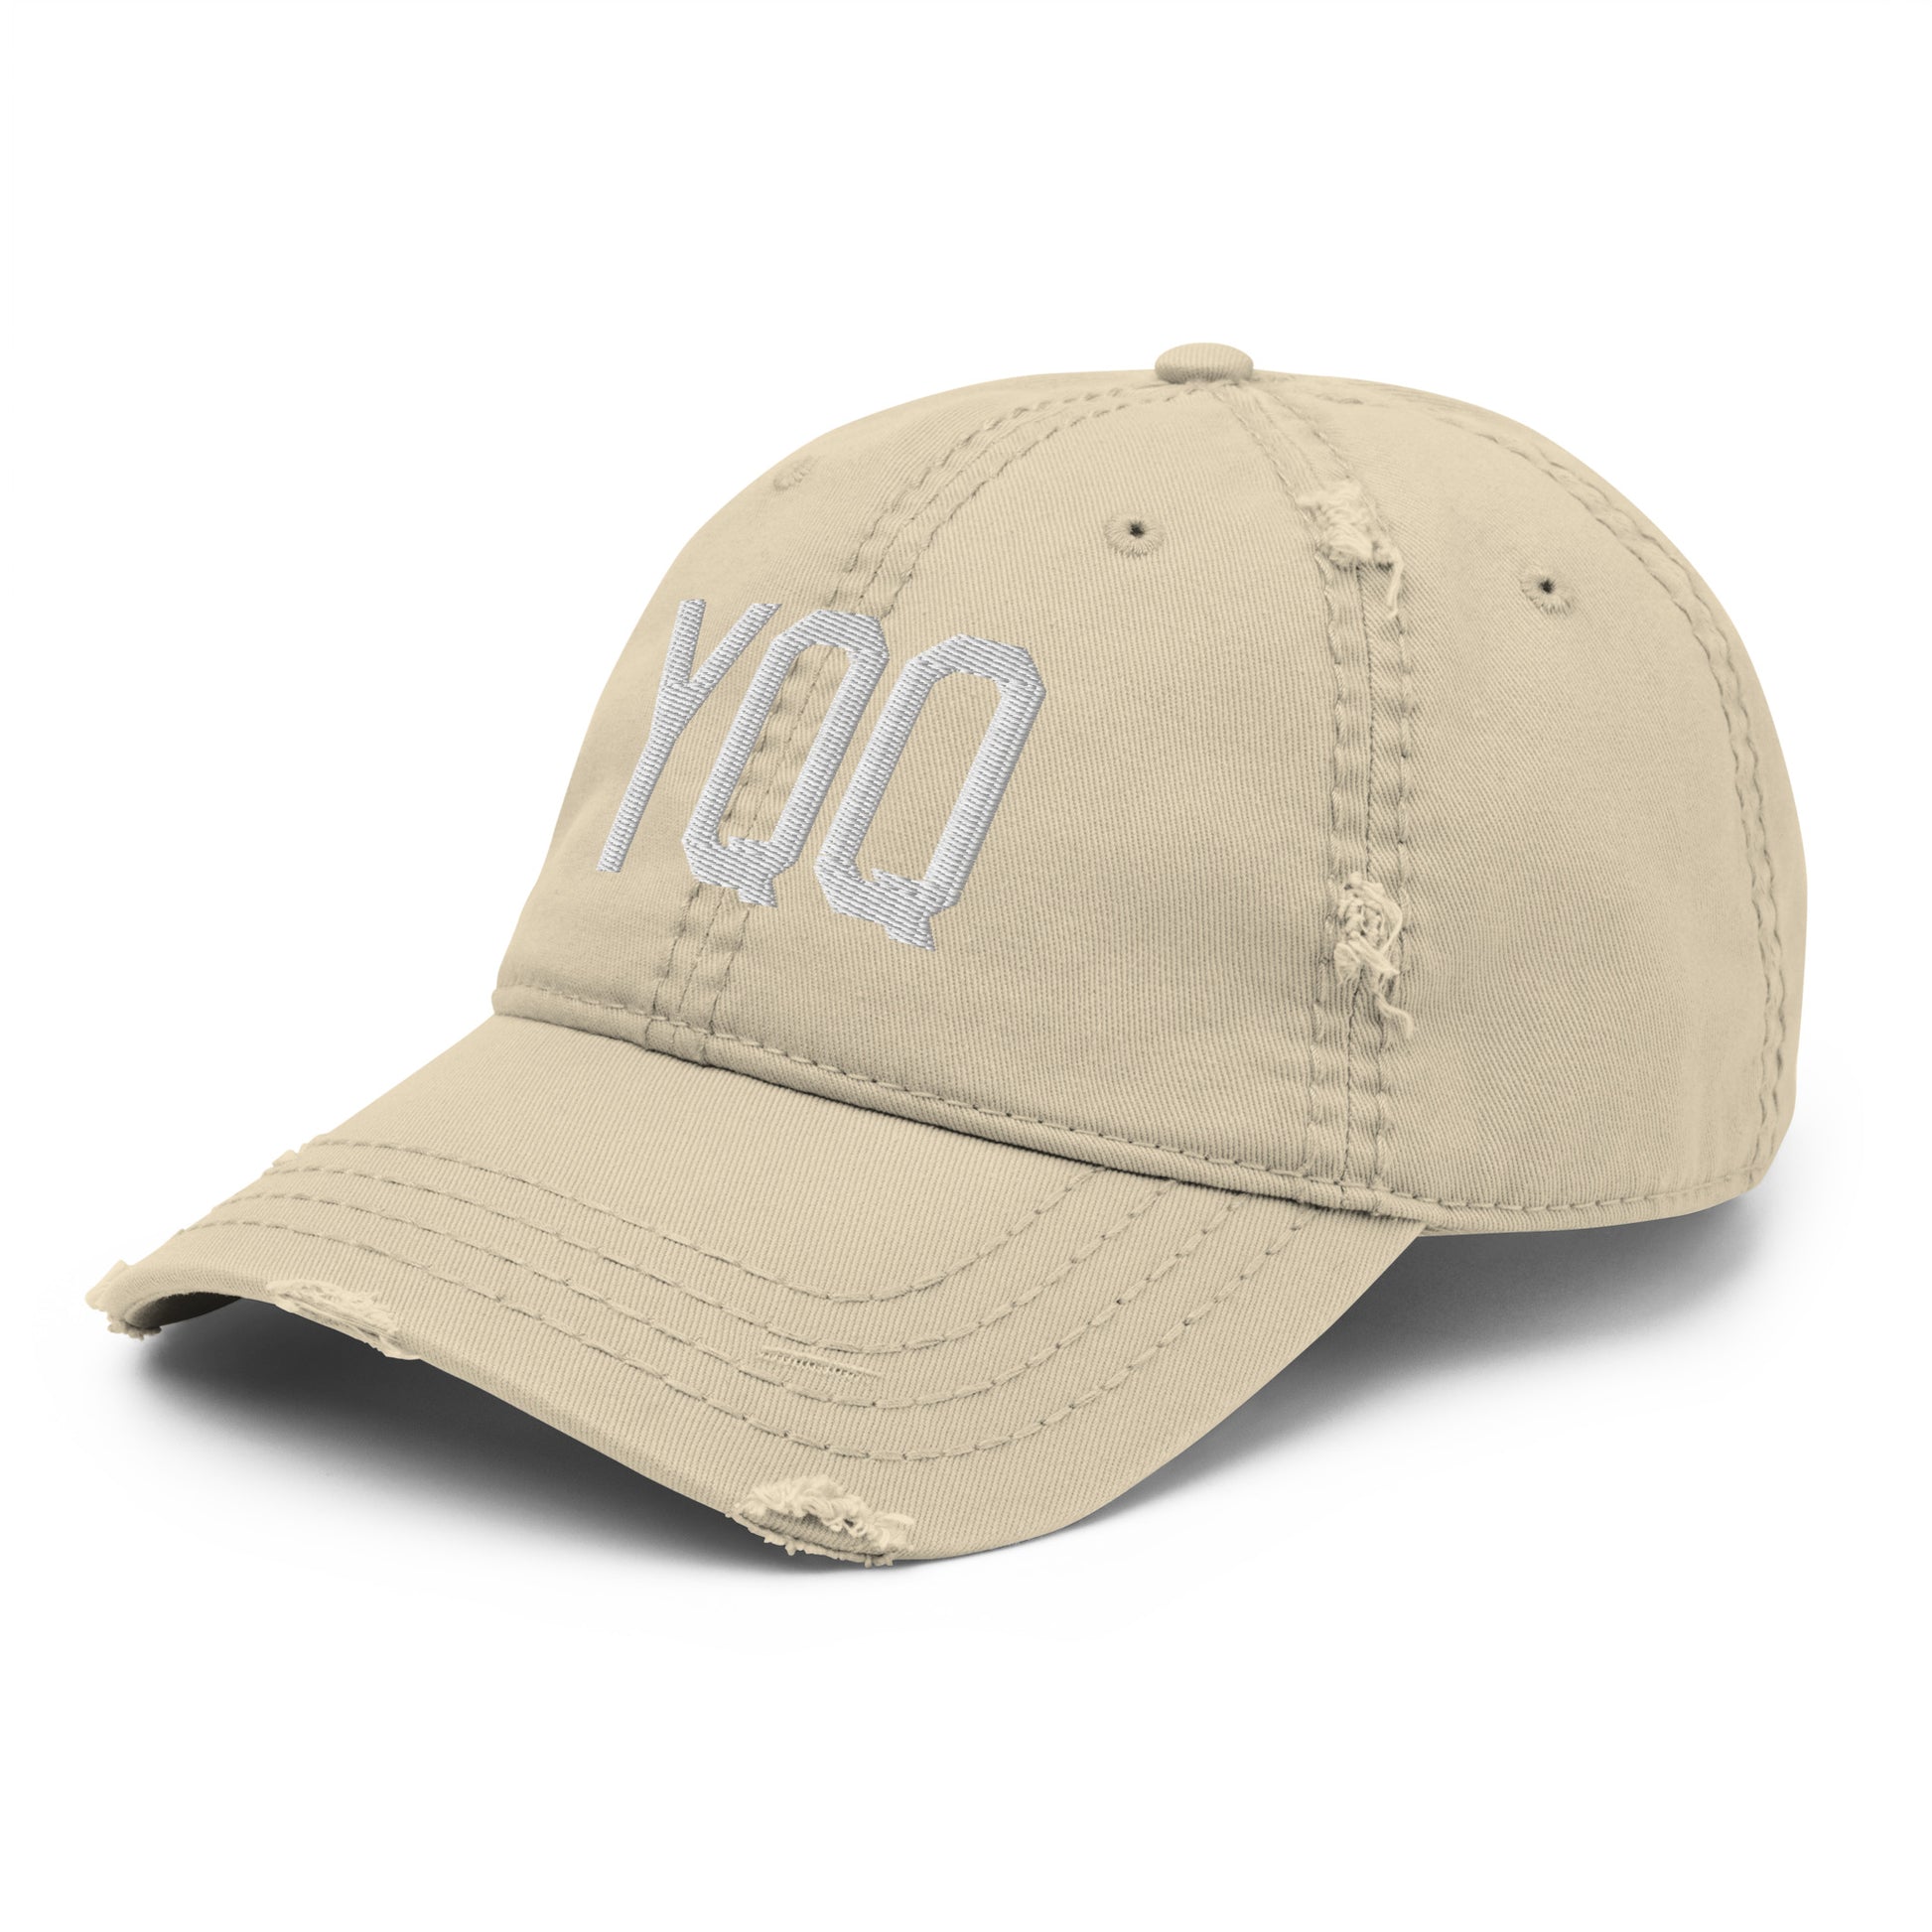 Airport Code Distressed Hat - White • YQQ Comox • YHM Designs - Image 19